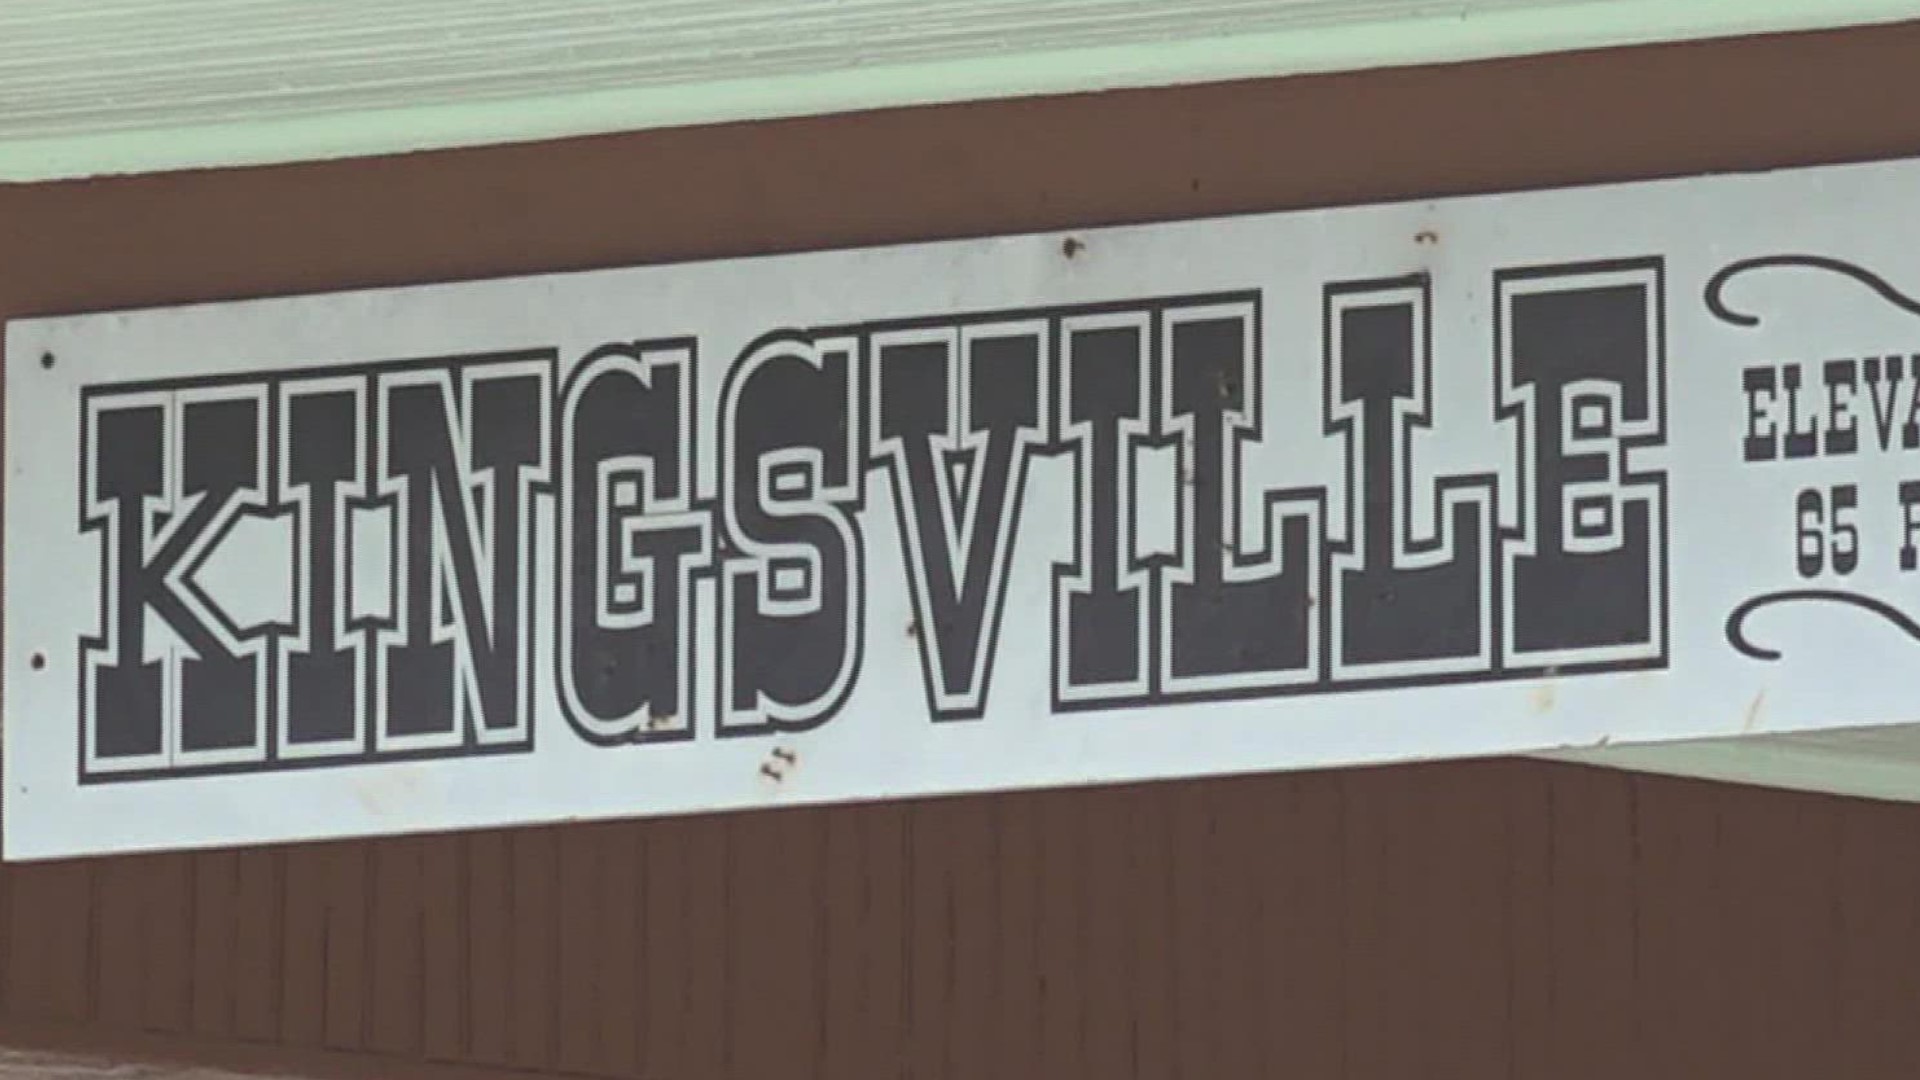 July 4 marks the city's 118th birthday, NAS-Kingsville's 80th birthday and America's 246th birthday. Celebrations will take place July 3 through 4.